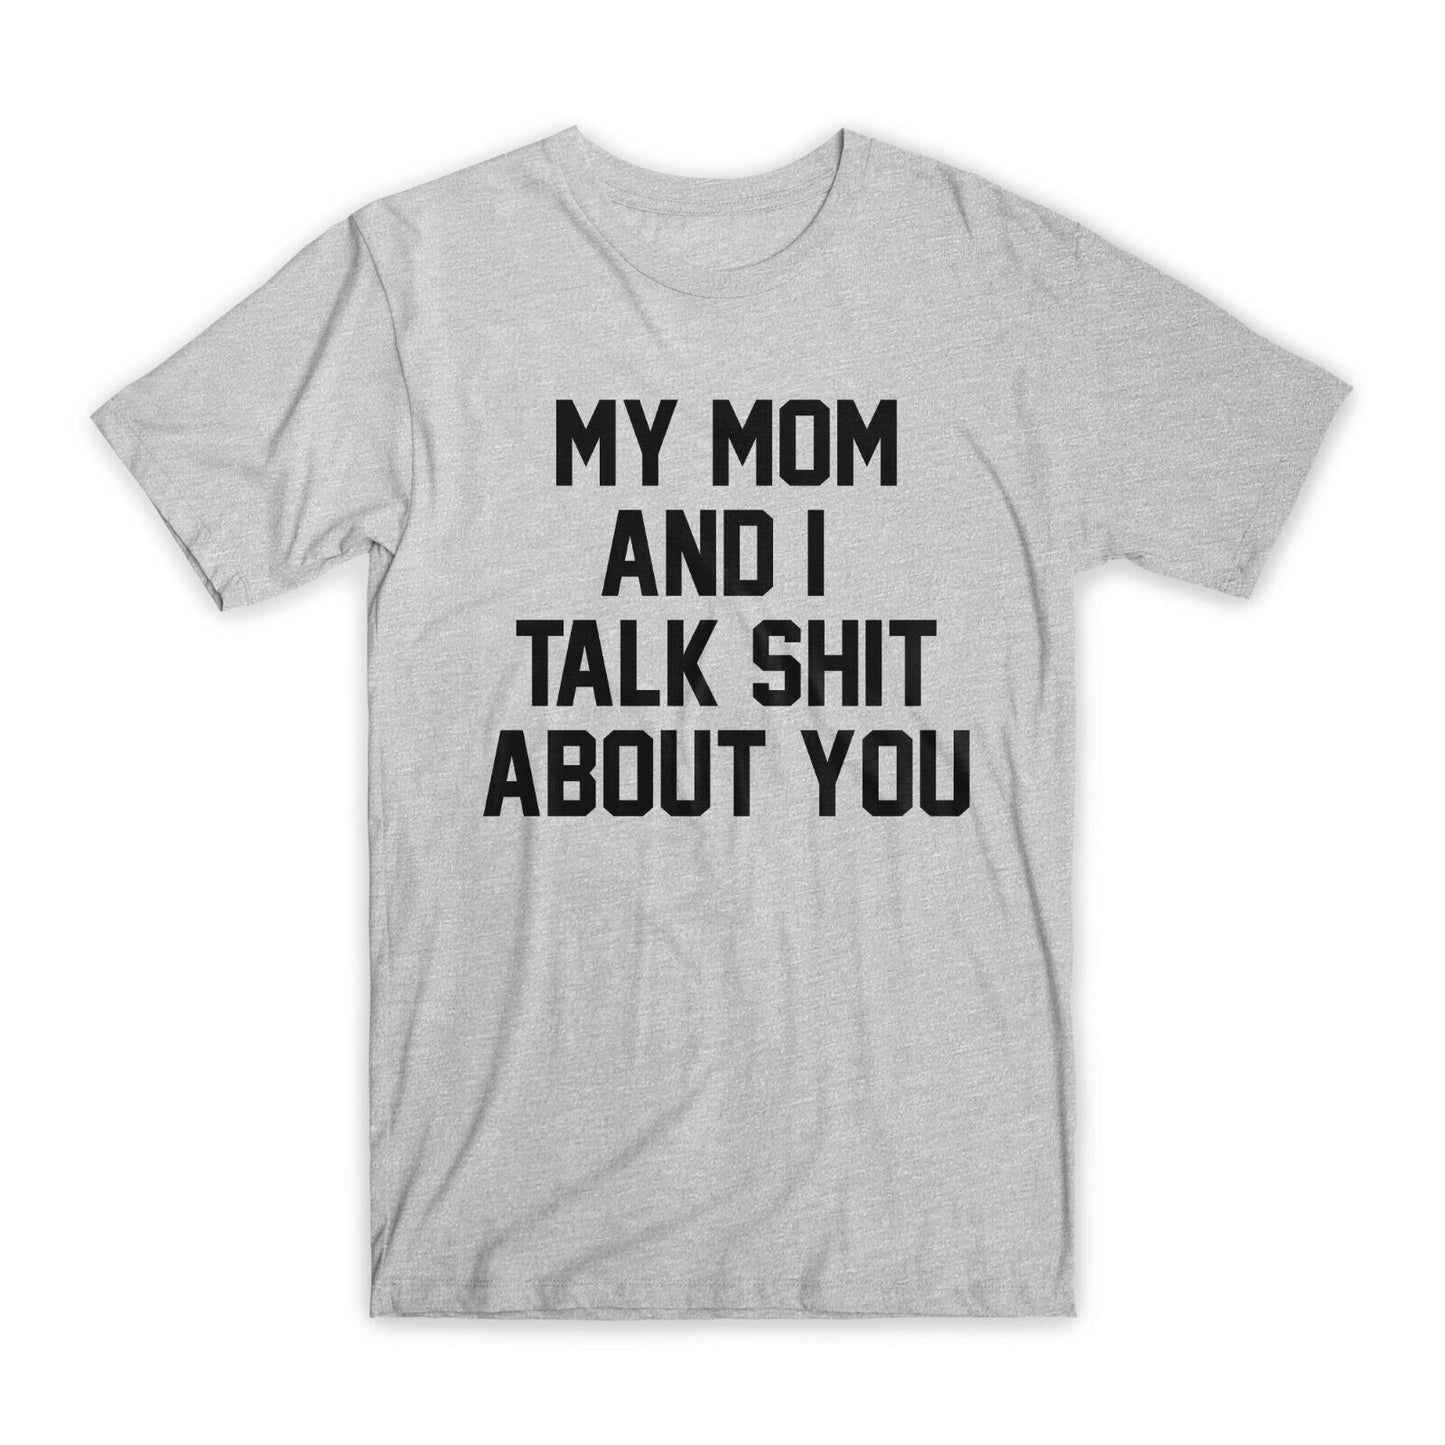 My Mom and I Talk About You T-Shirt Premium Soft Cotton Funny Tees Gift NEW